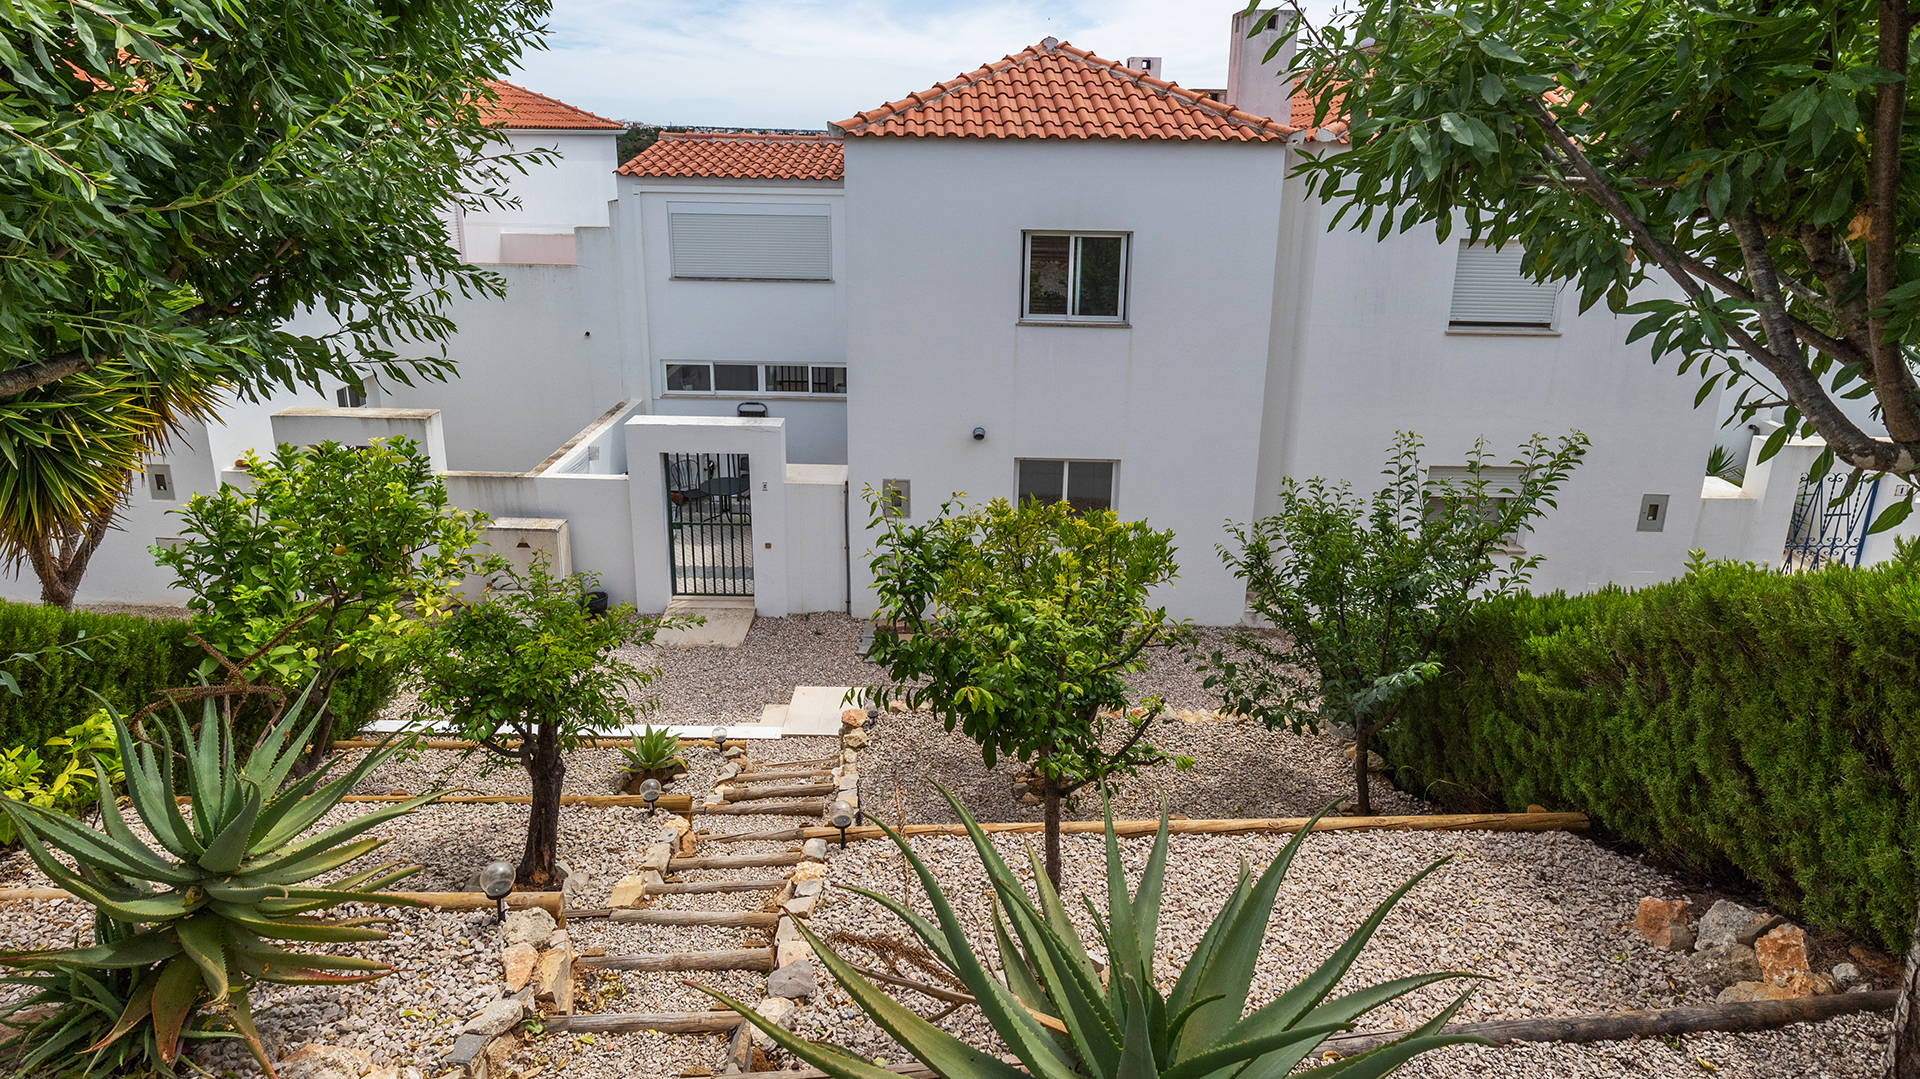 2+1 bedroom semi-detached home with garden and terraces, close to Tavira | TV1923 Semi-detached house with garden area, access to individual landscaped terrace. Peaceful area of Tavira, but close to the centre.